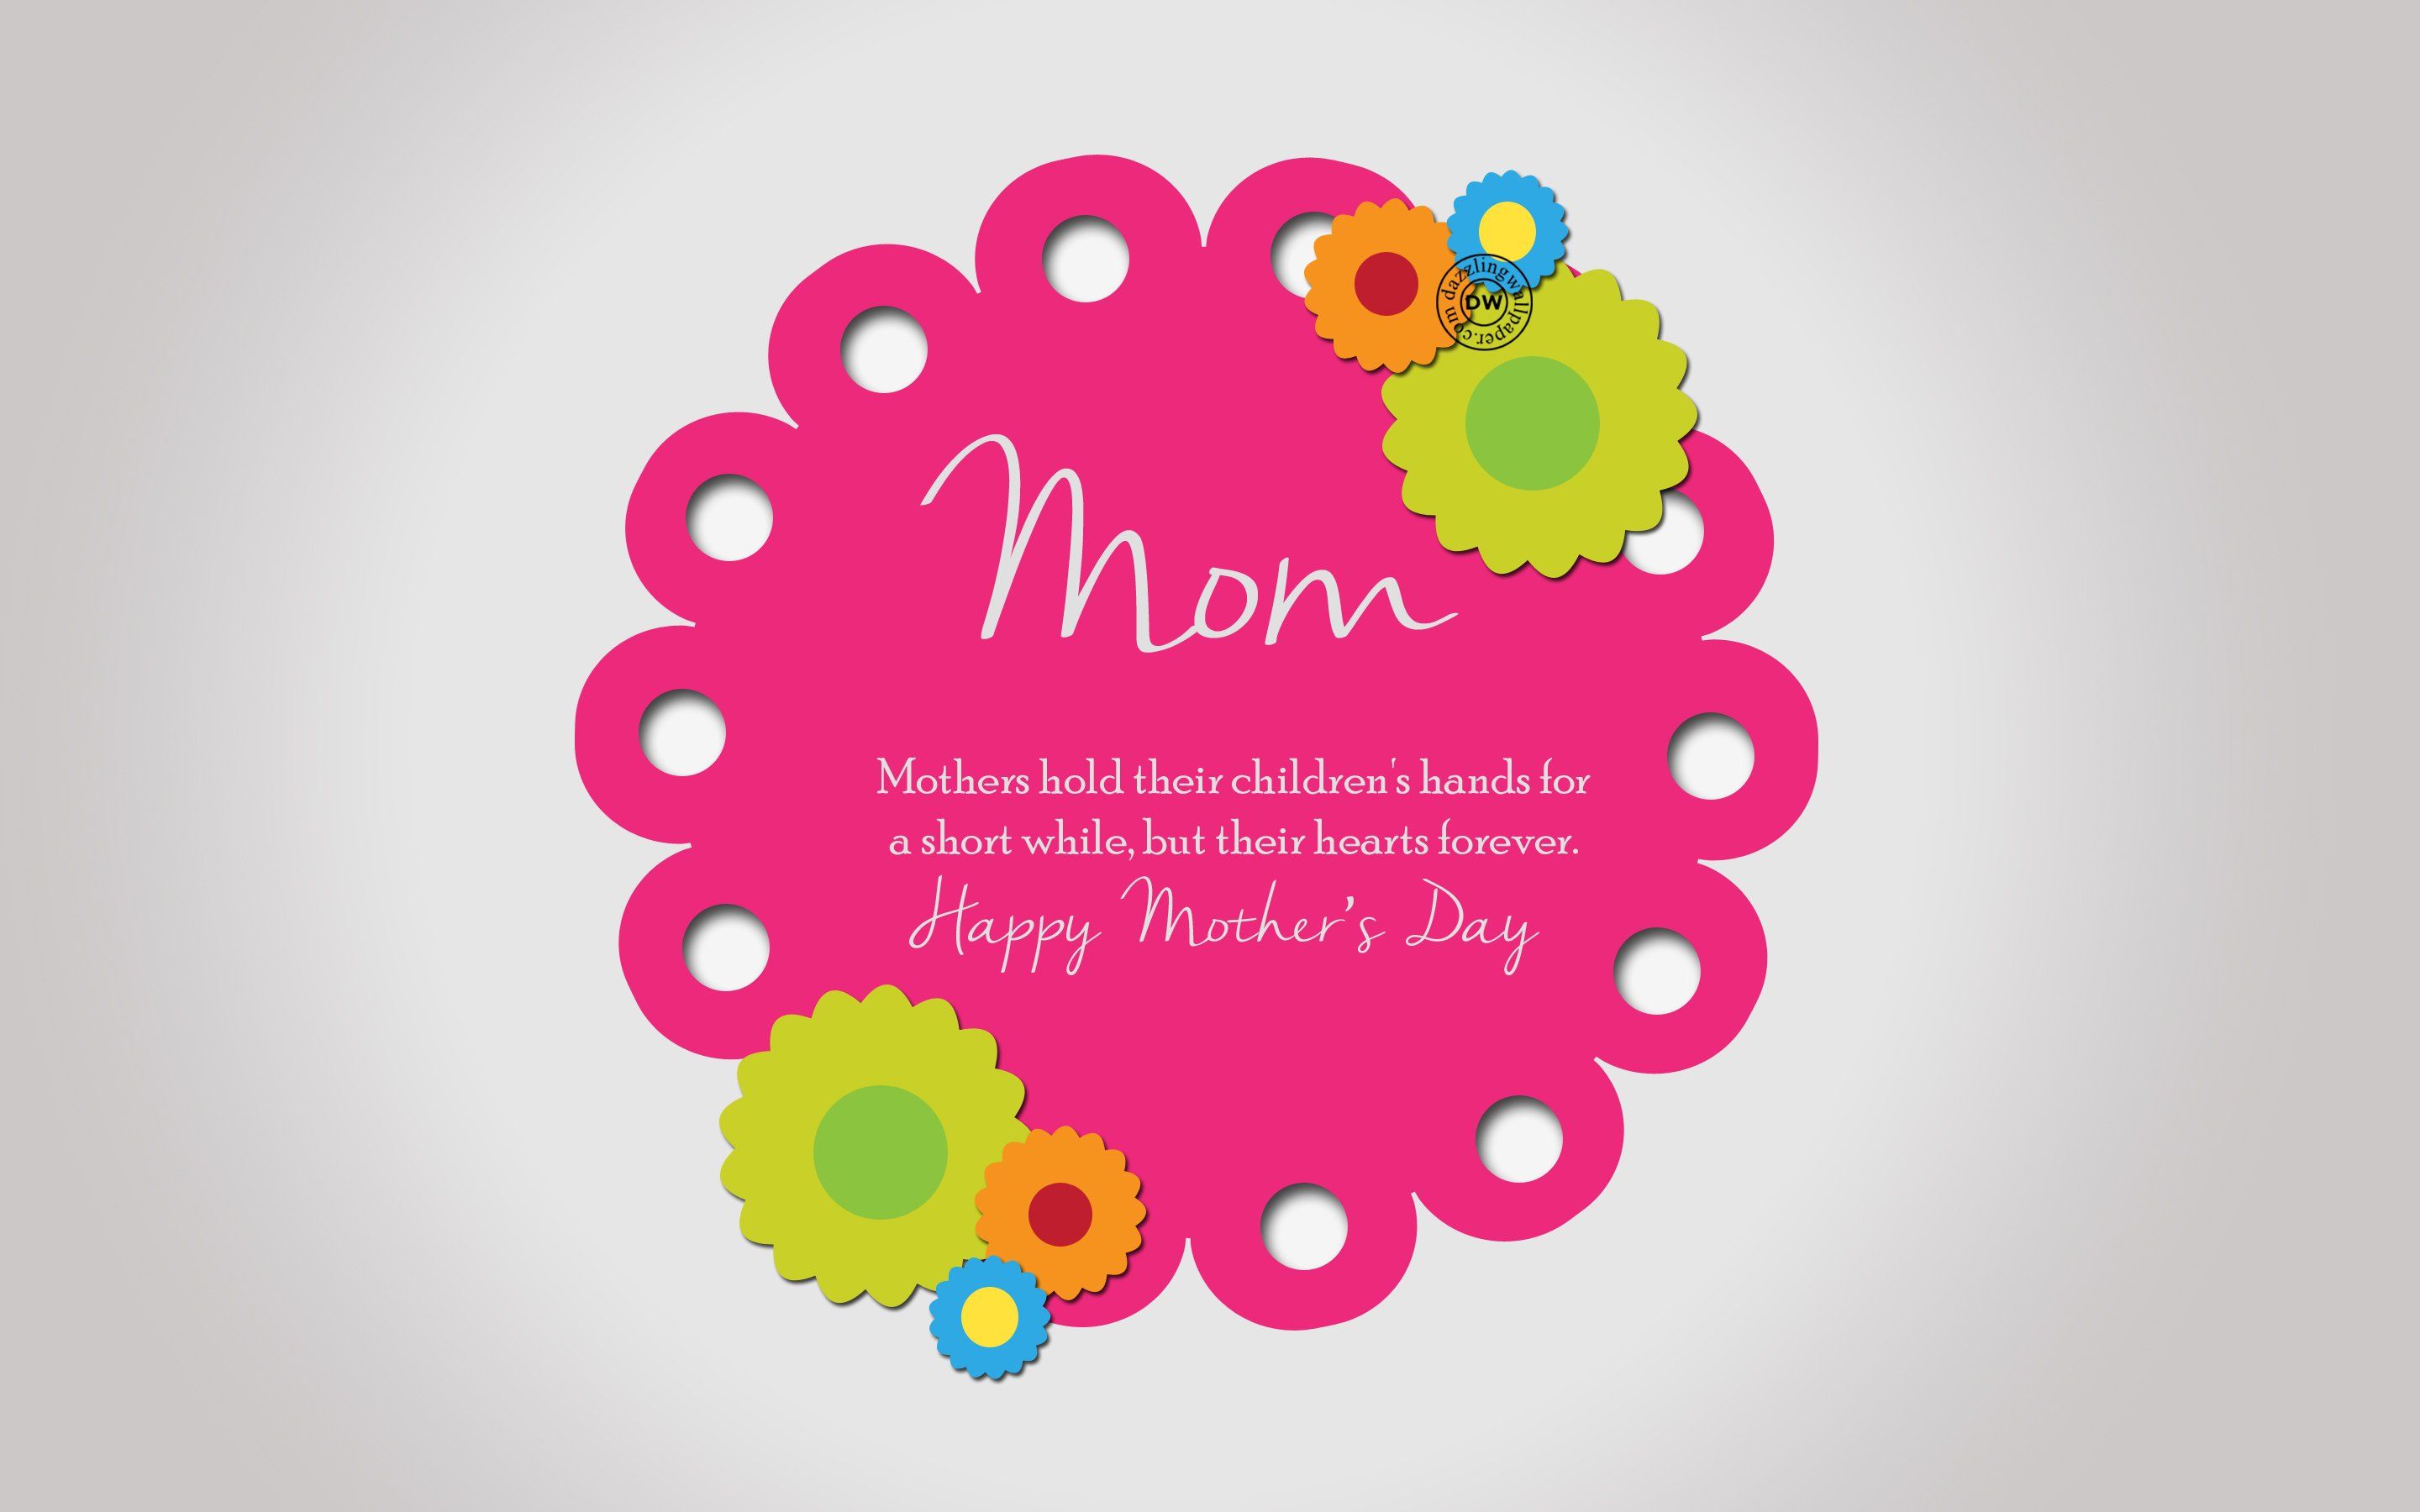 Free download Mom Wallpaper Top Mom HQ Background Mom WD32 Wallpaper [2880x1800] for your Desktop, Mobile & Tablet. Explore Mom Wallpaper. I Love You Mom Wallpaper, Free Mothers Day